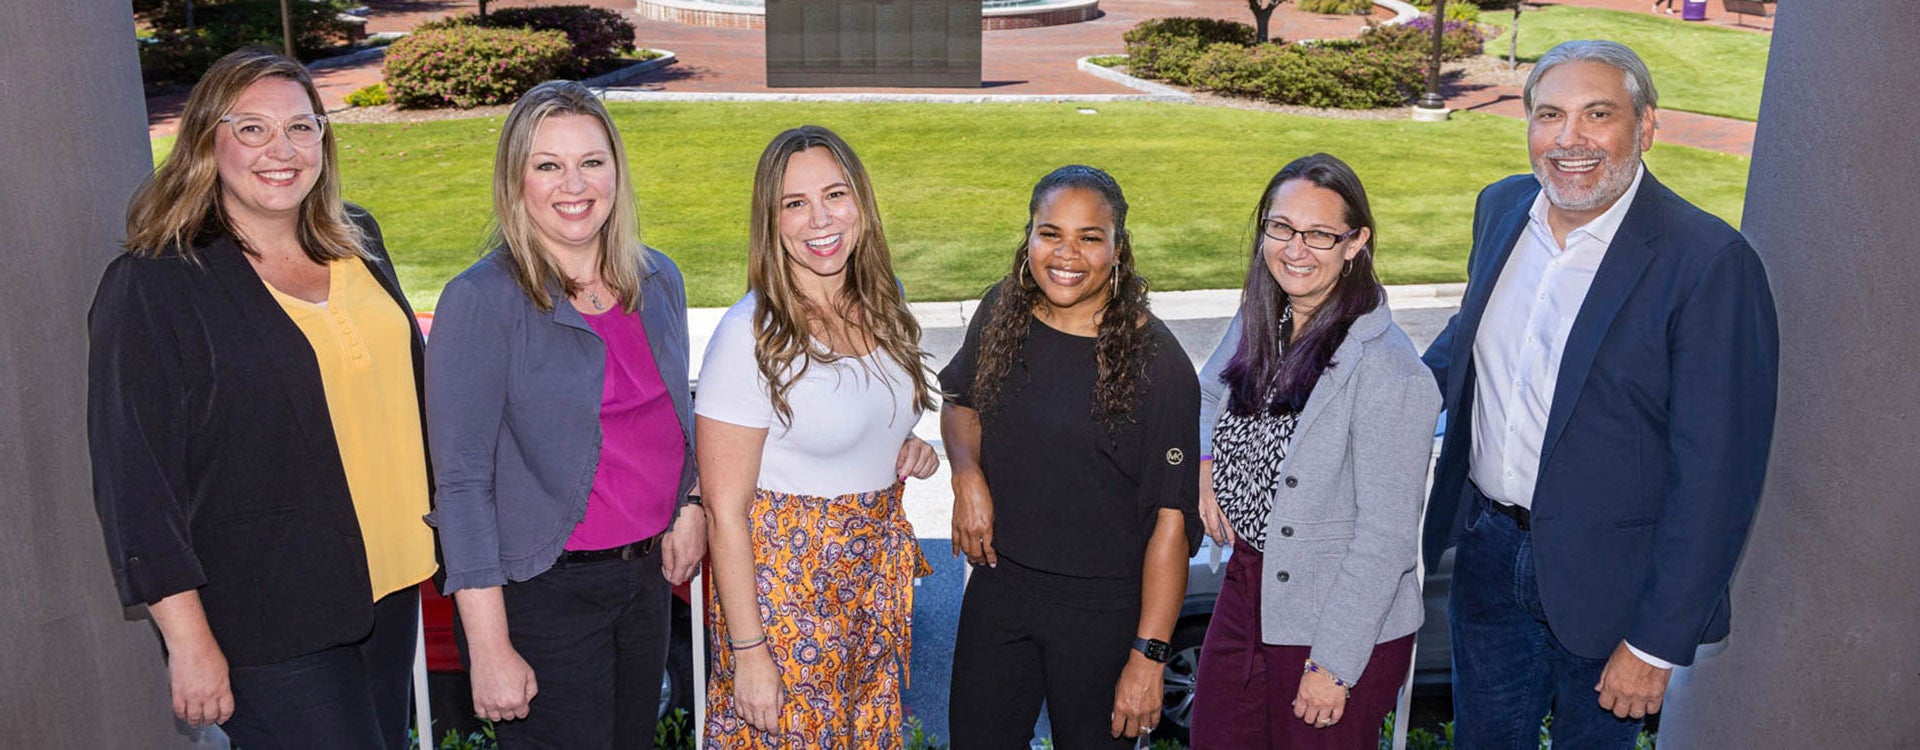 Six ECU College of Education faculty members are working on the edPIRATE grant. From left, they are Dr. Jennifer Gallagher, Dr. Karen Jones, Dr. Amy Swain, Dr. Christy Howard, Dr. Kristen Cuthrell and Dr. Matthew Militello. 